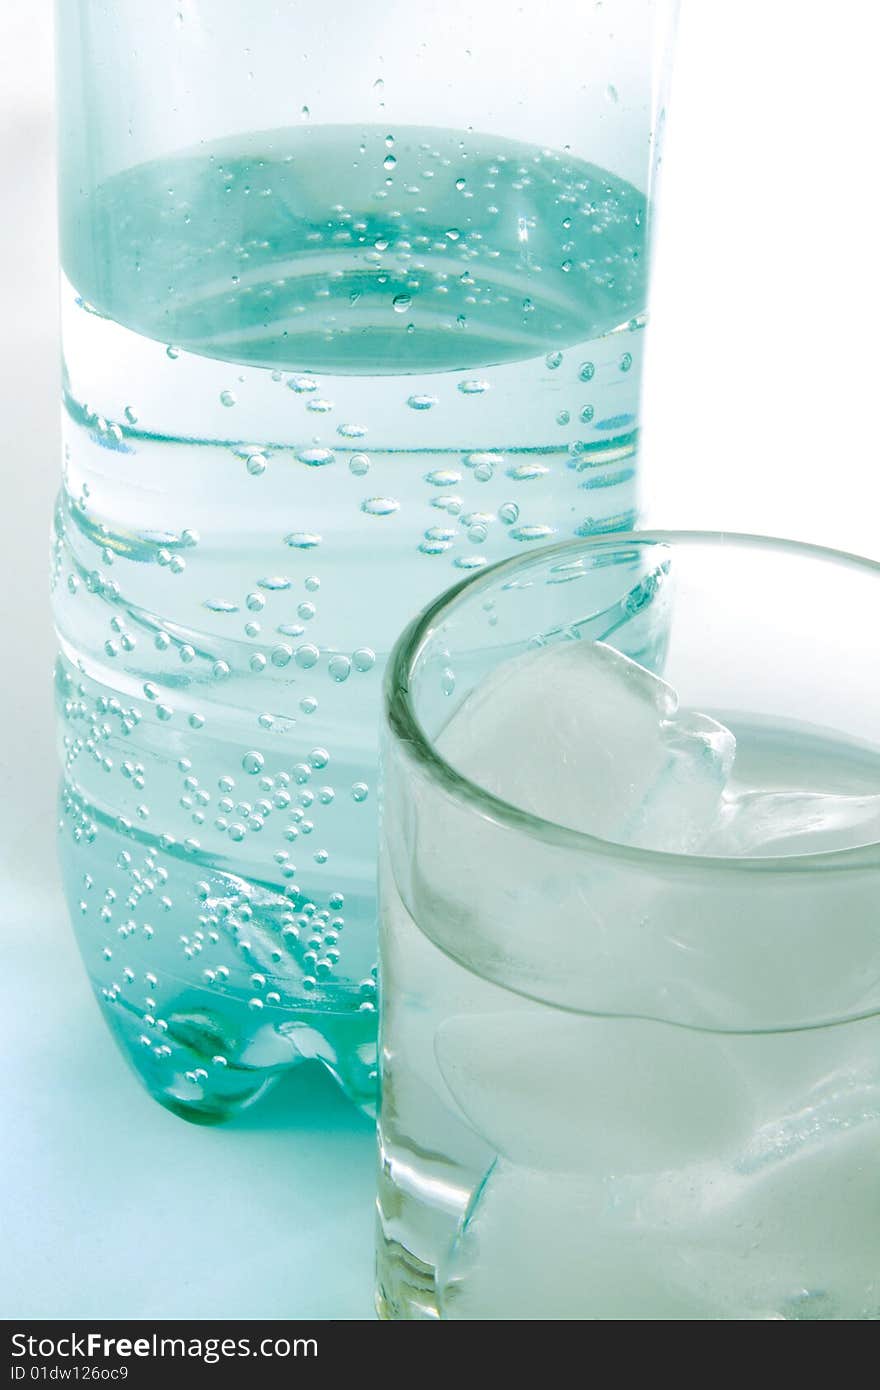 Plastic bottle and glass with pure water.